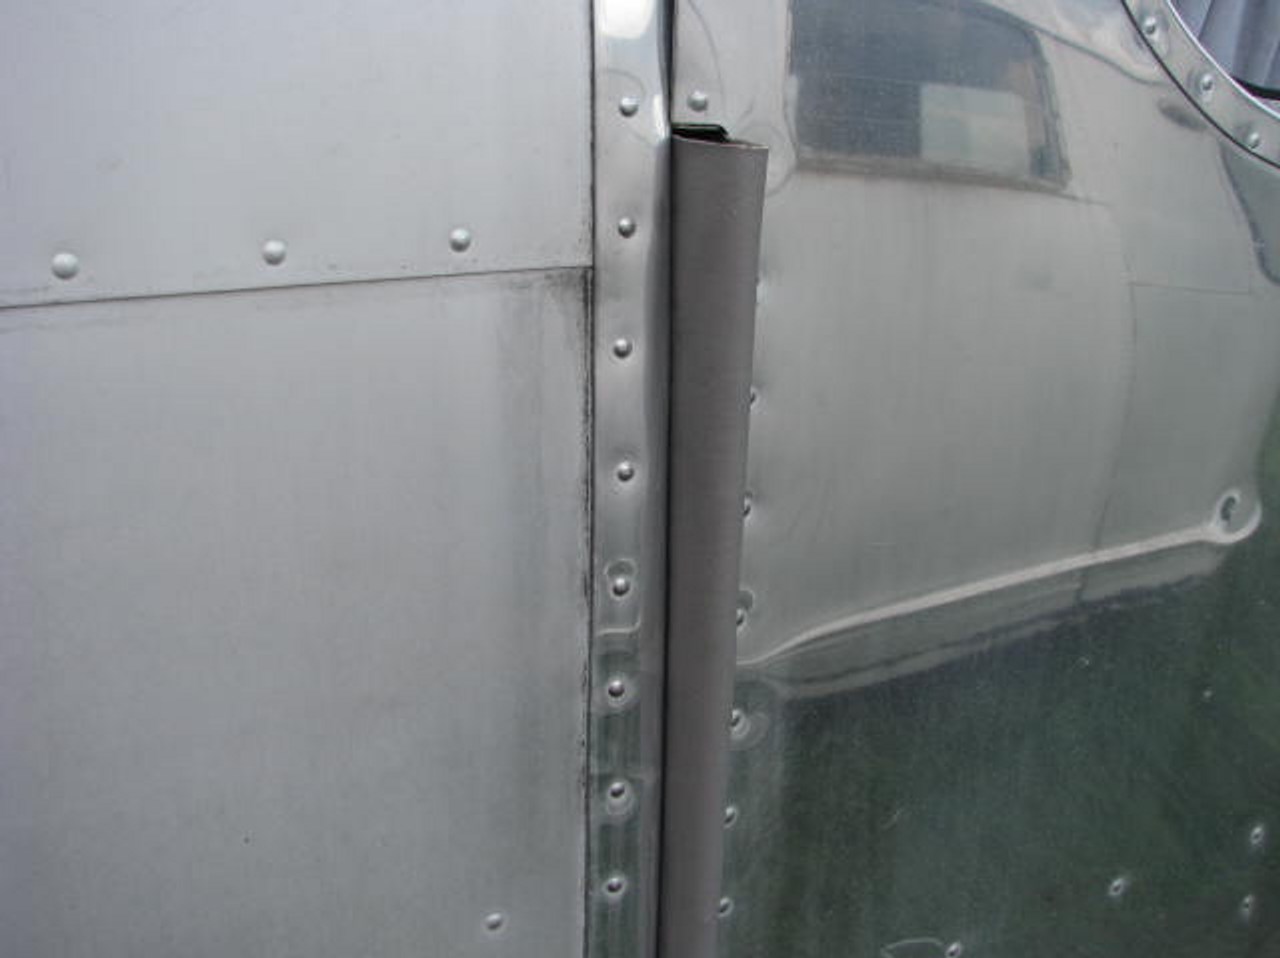 Spartan Door Hinge Cover (CHW139) NEW HINGE COVER INSTALLED